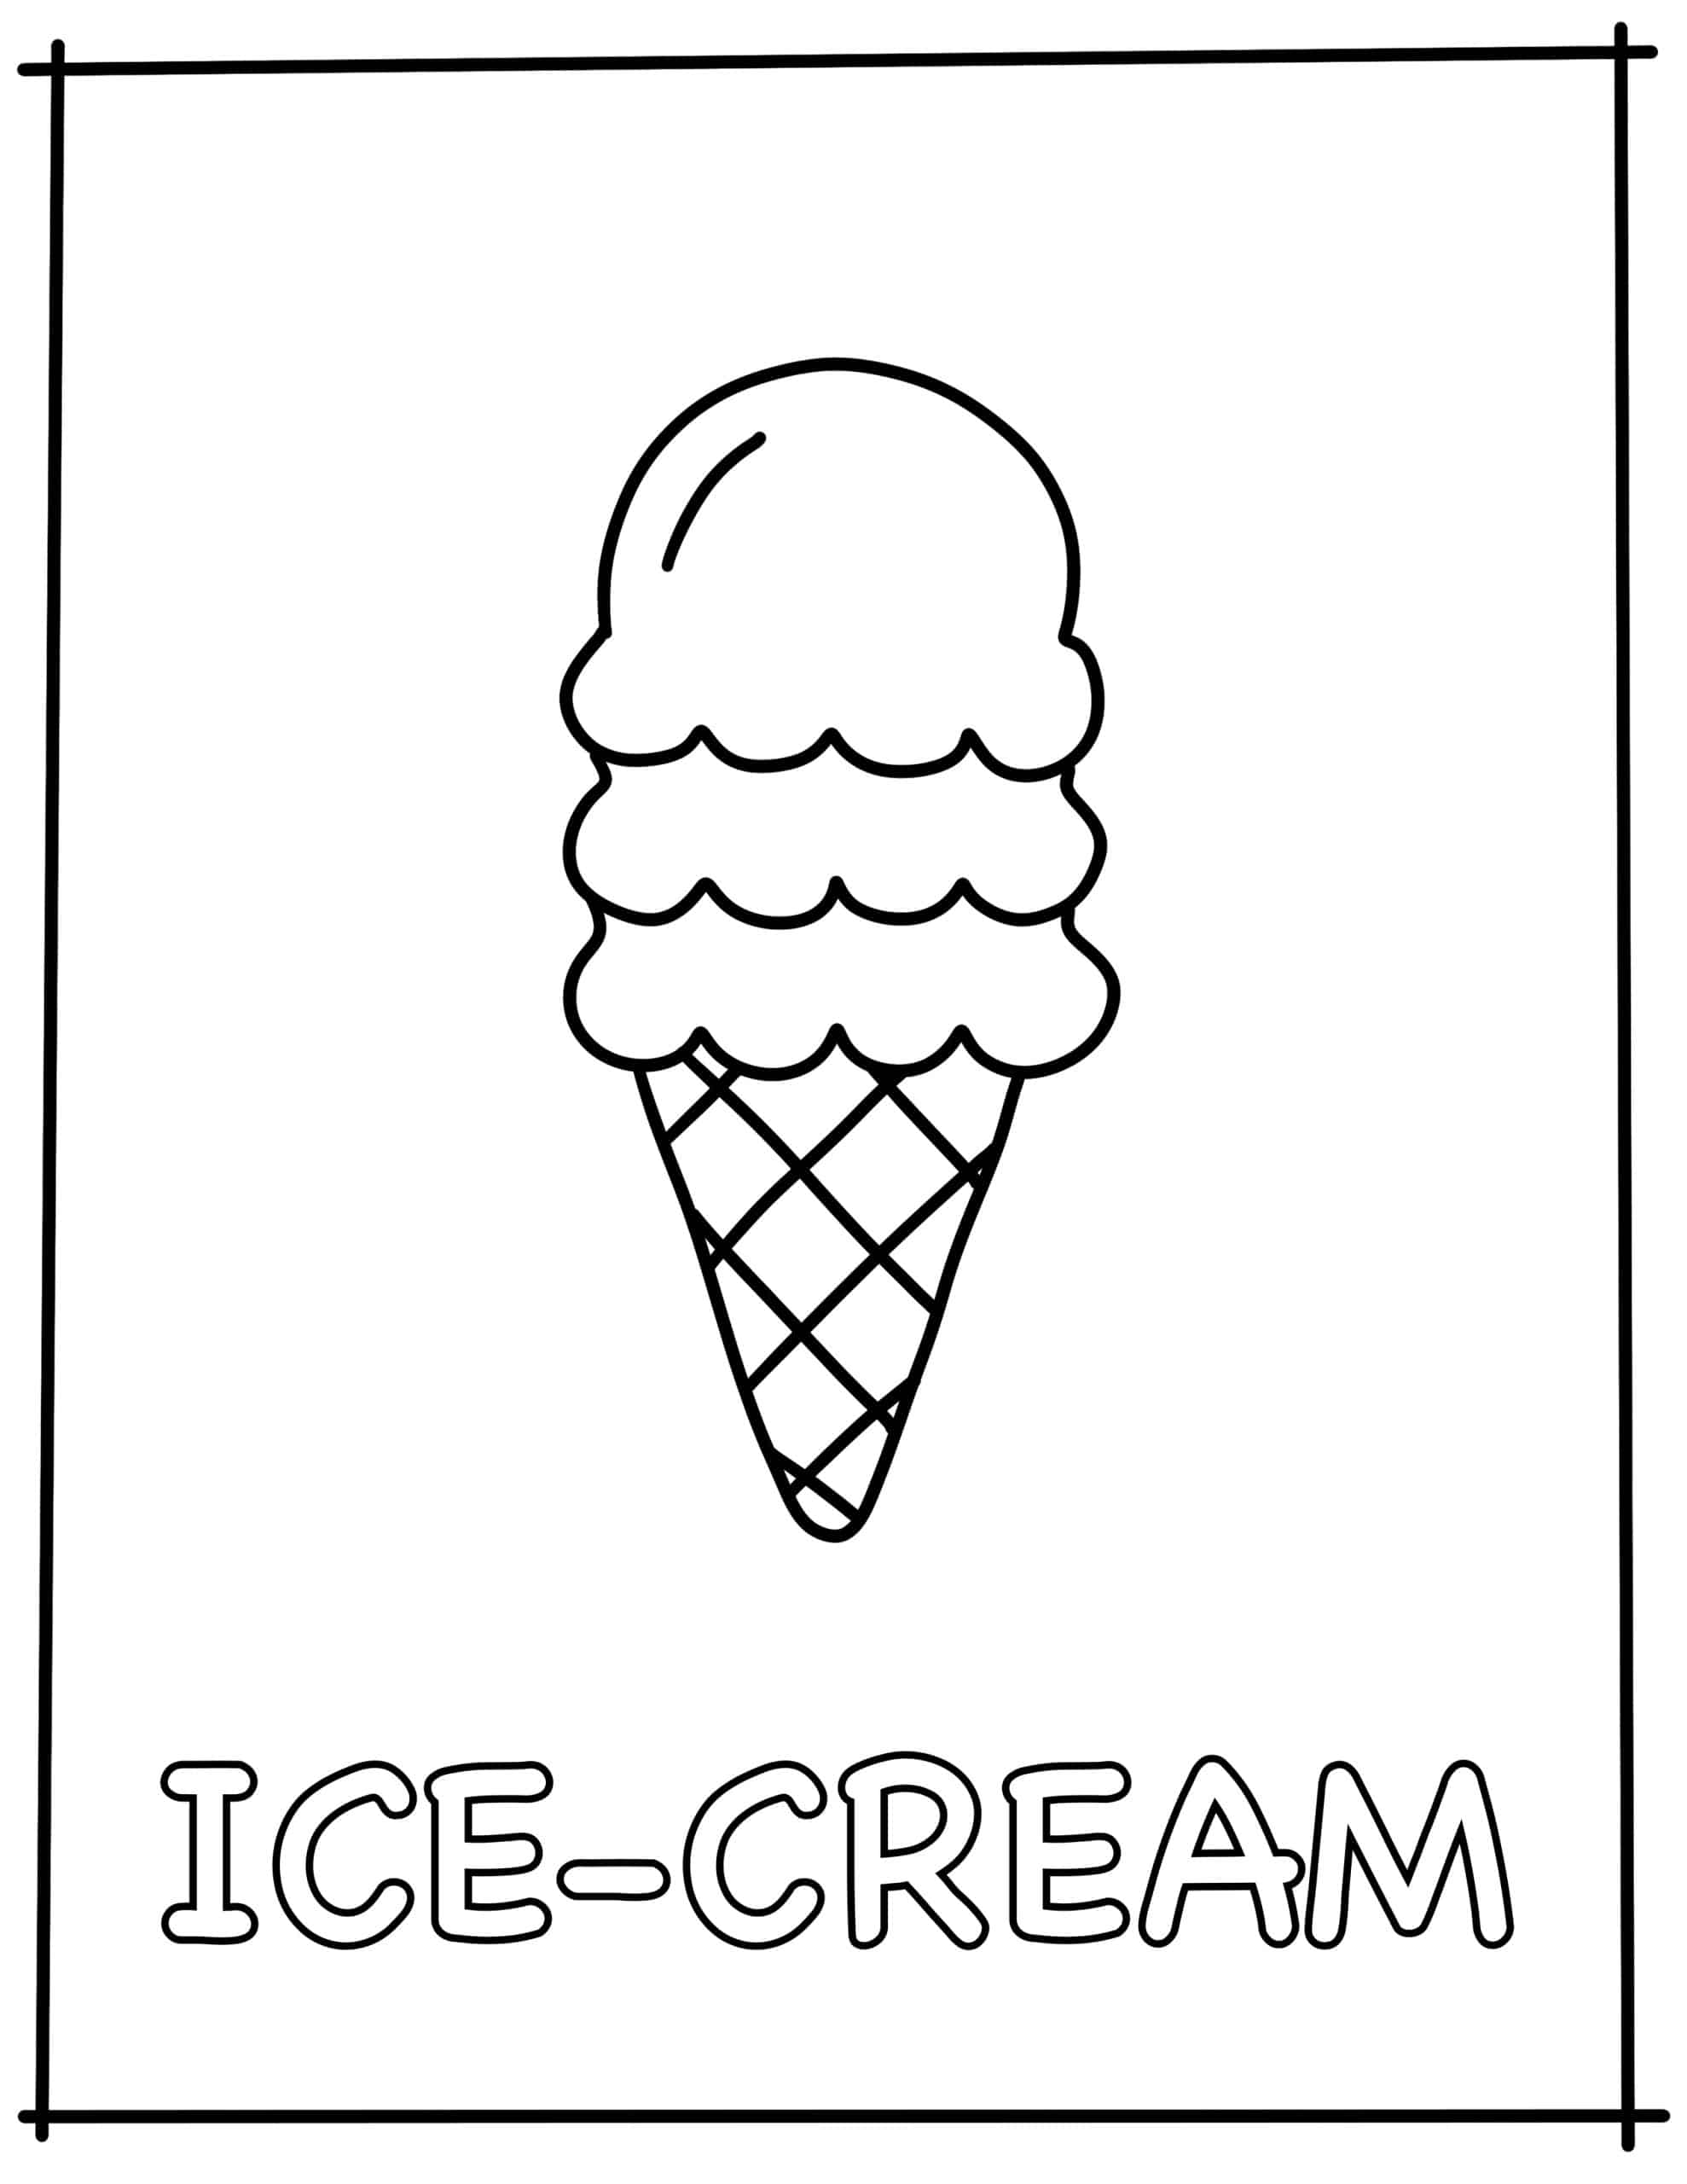 Free summer coloring pages updated